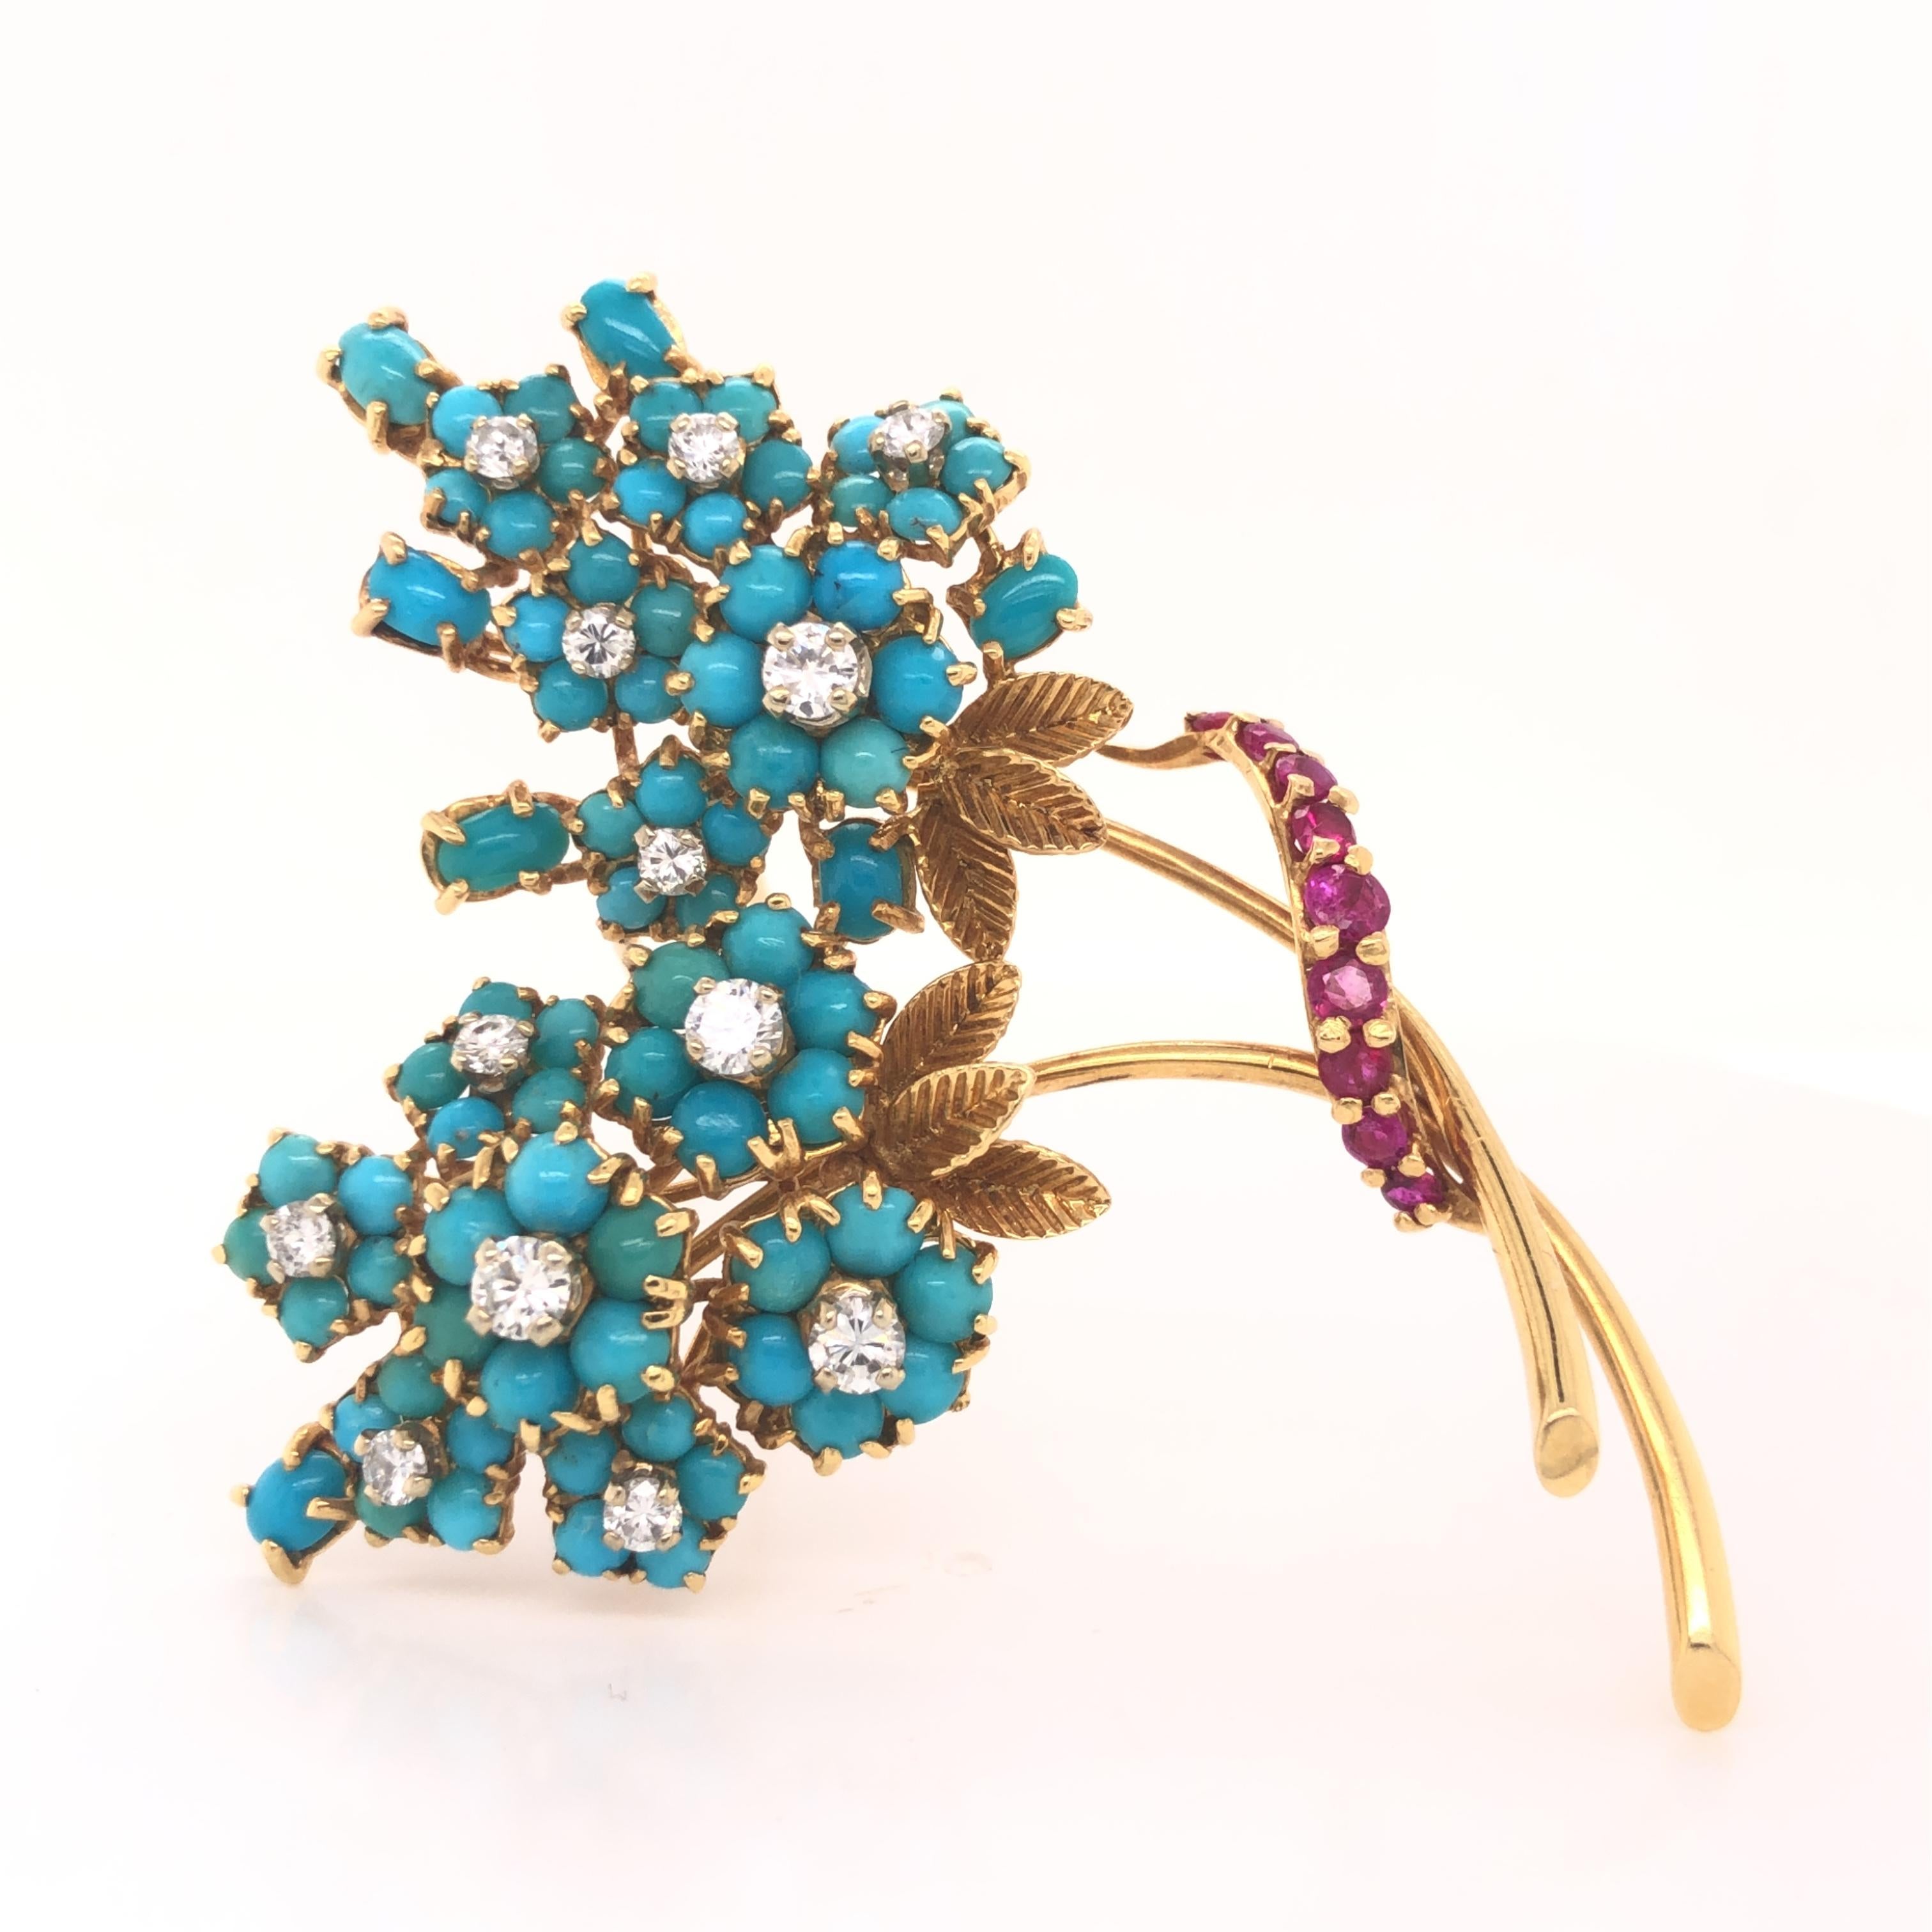 Retro French Made Turquoise Diamond & Ruby Floral Brooch 18k